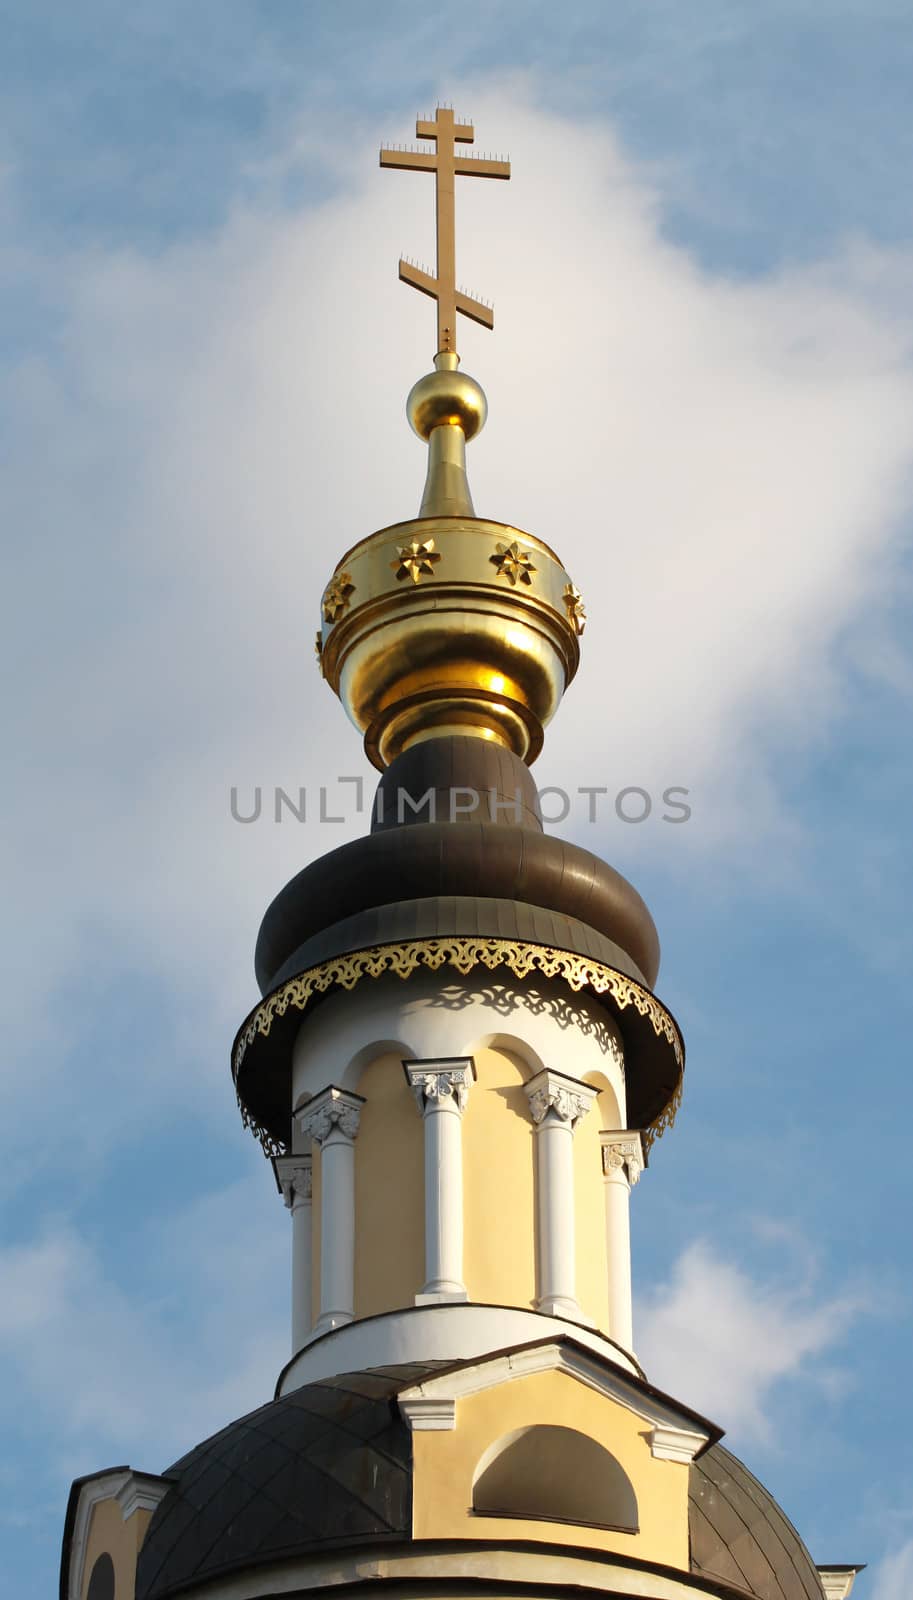 The golden dome of the church with the cross